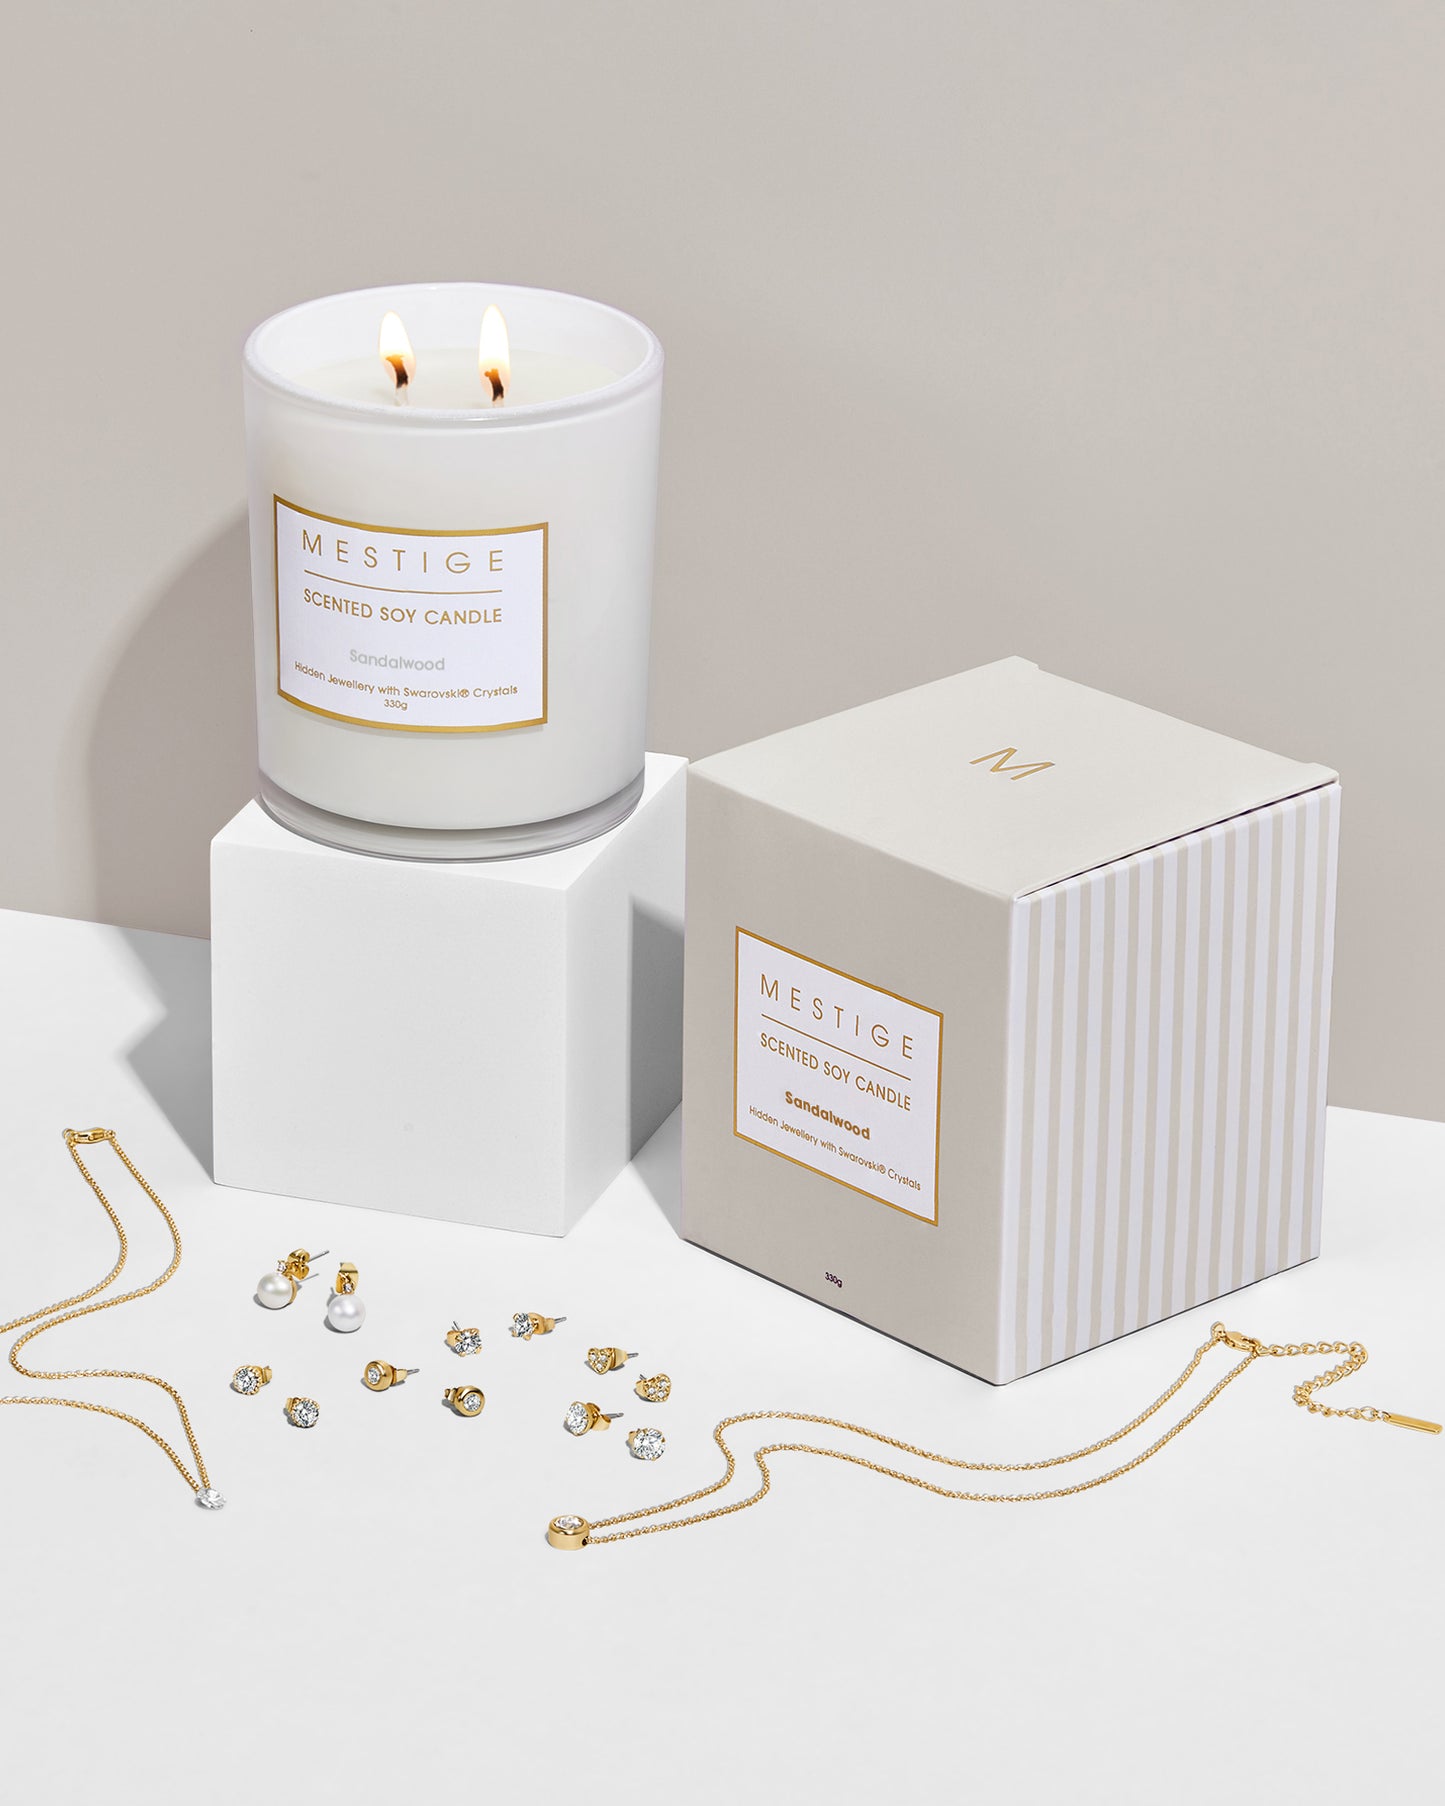 Sandalwood - Clove and Musk Scented Soy Candle with Hidden Jewellery